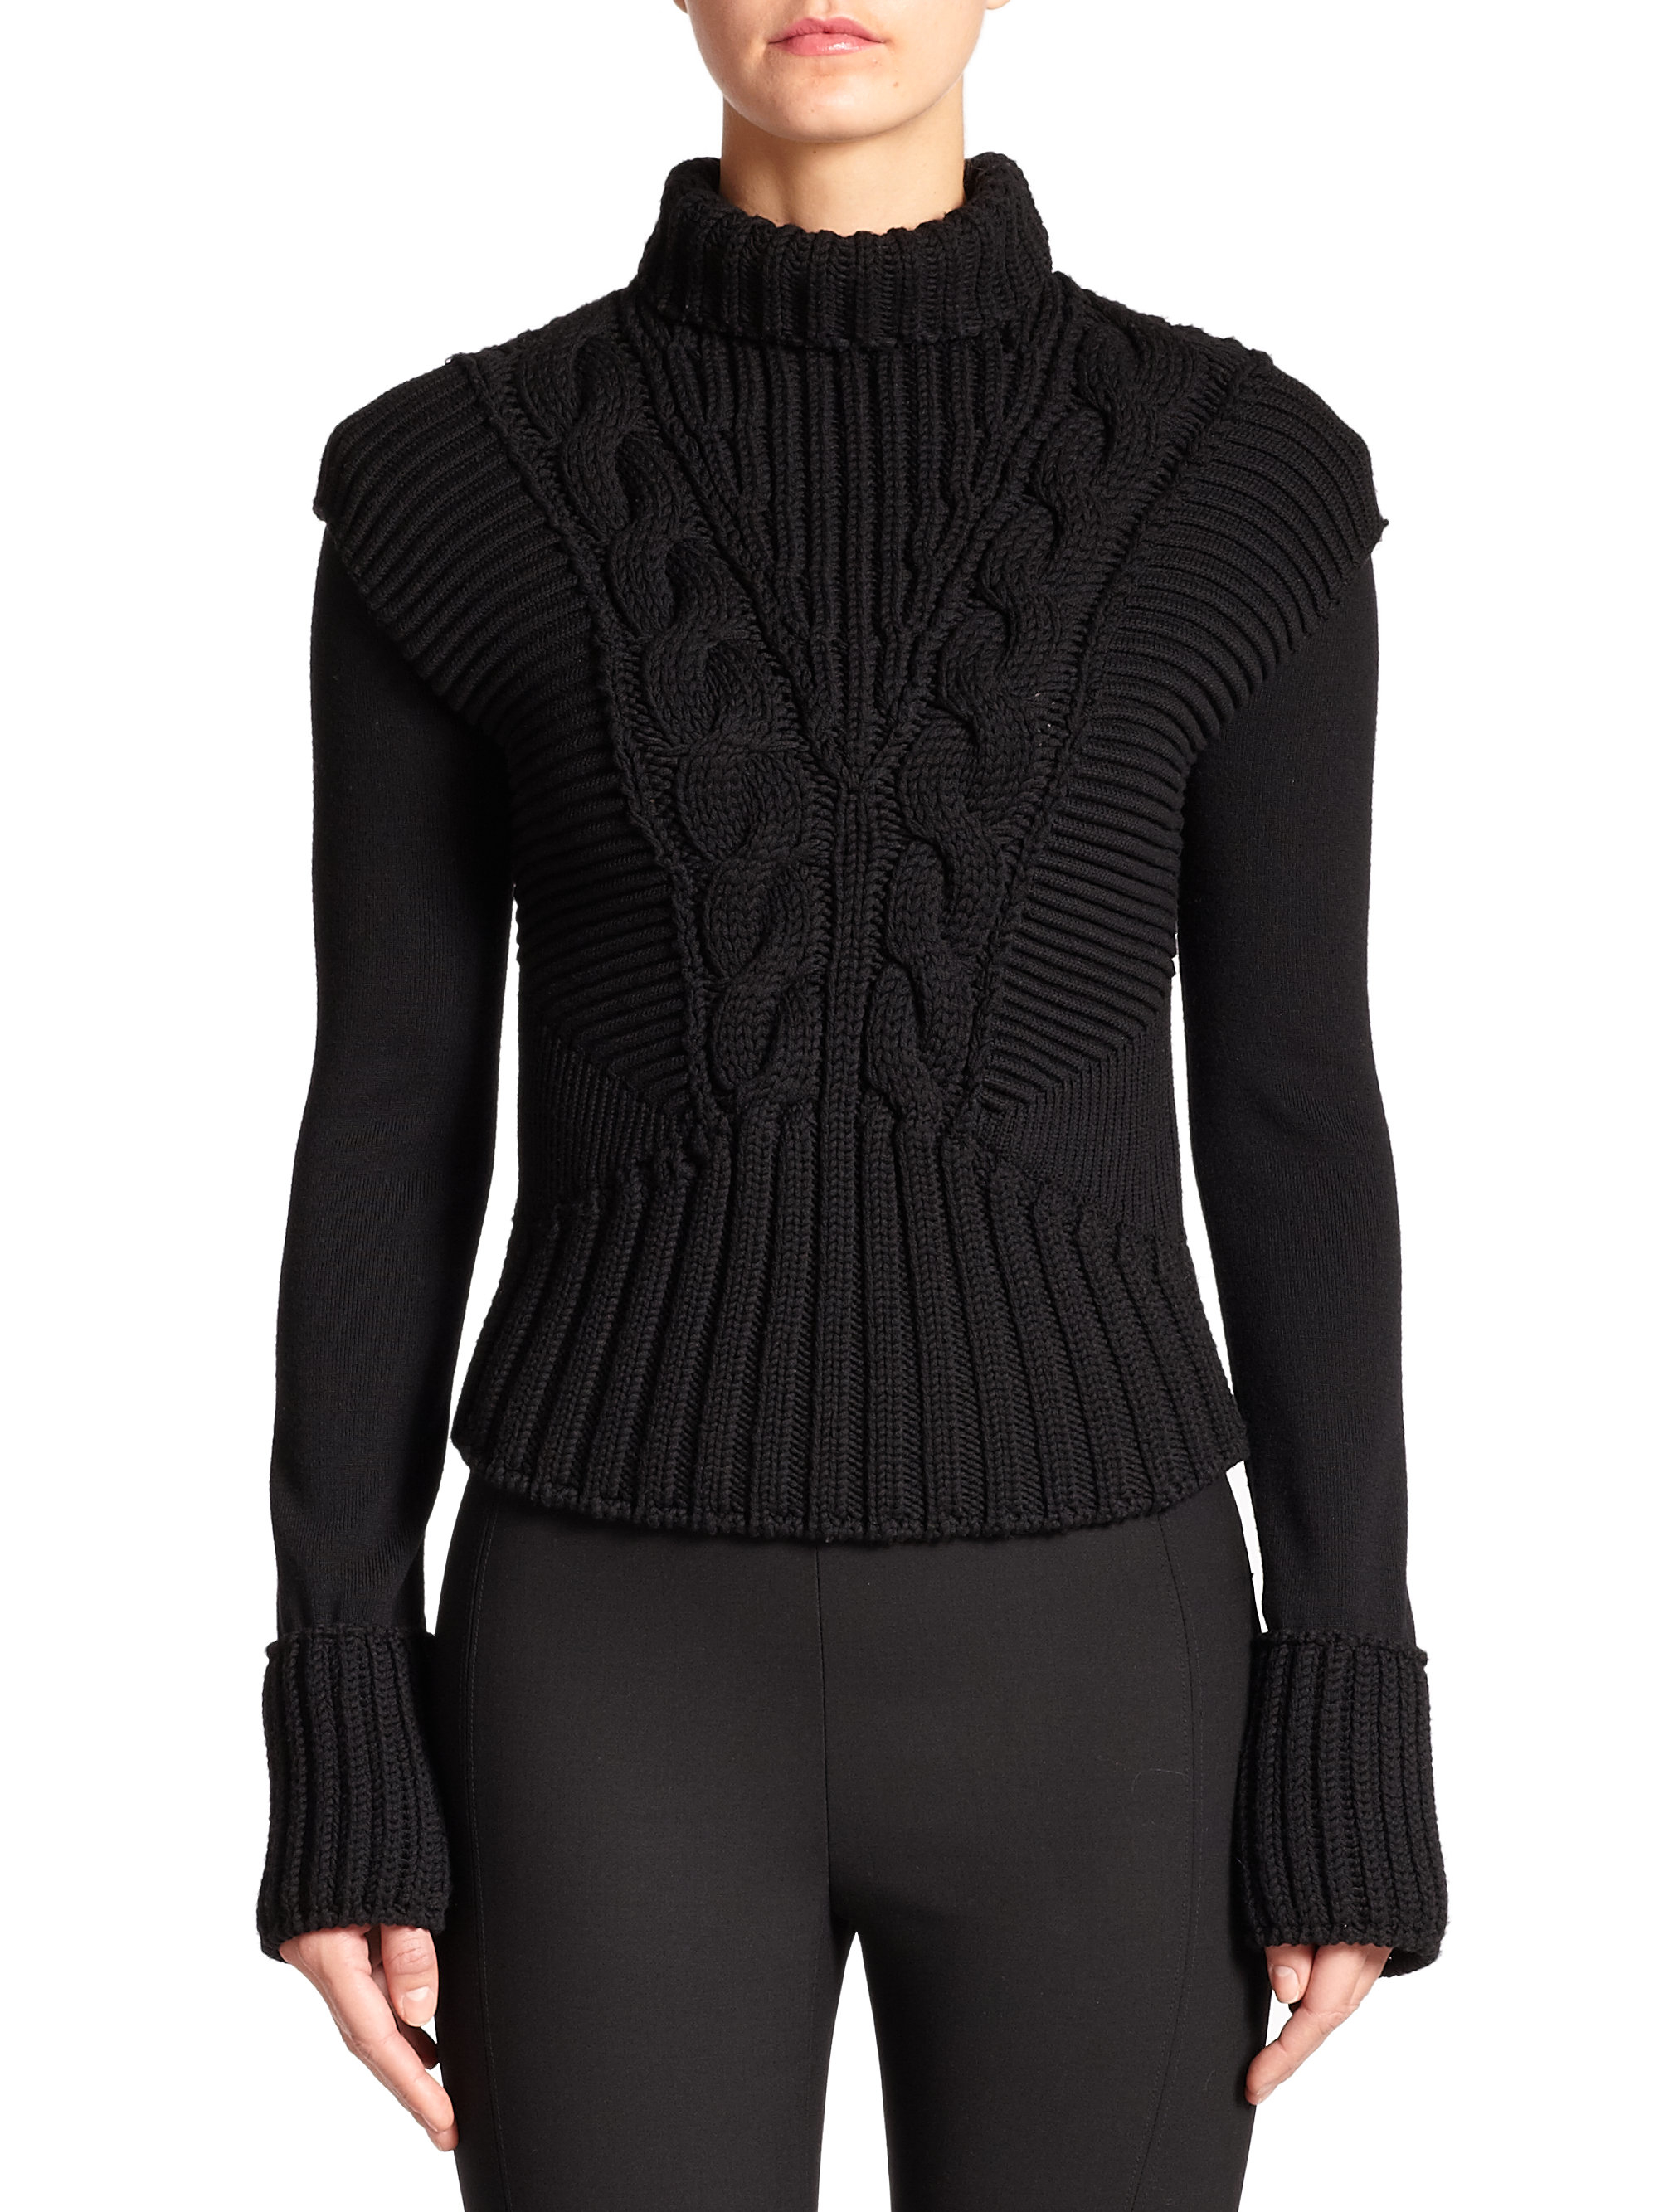 Alexander mcqueen Cable-knit Convertible Sweater in Black | Lyst